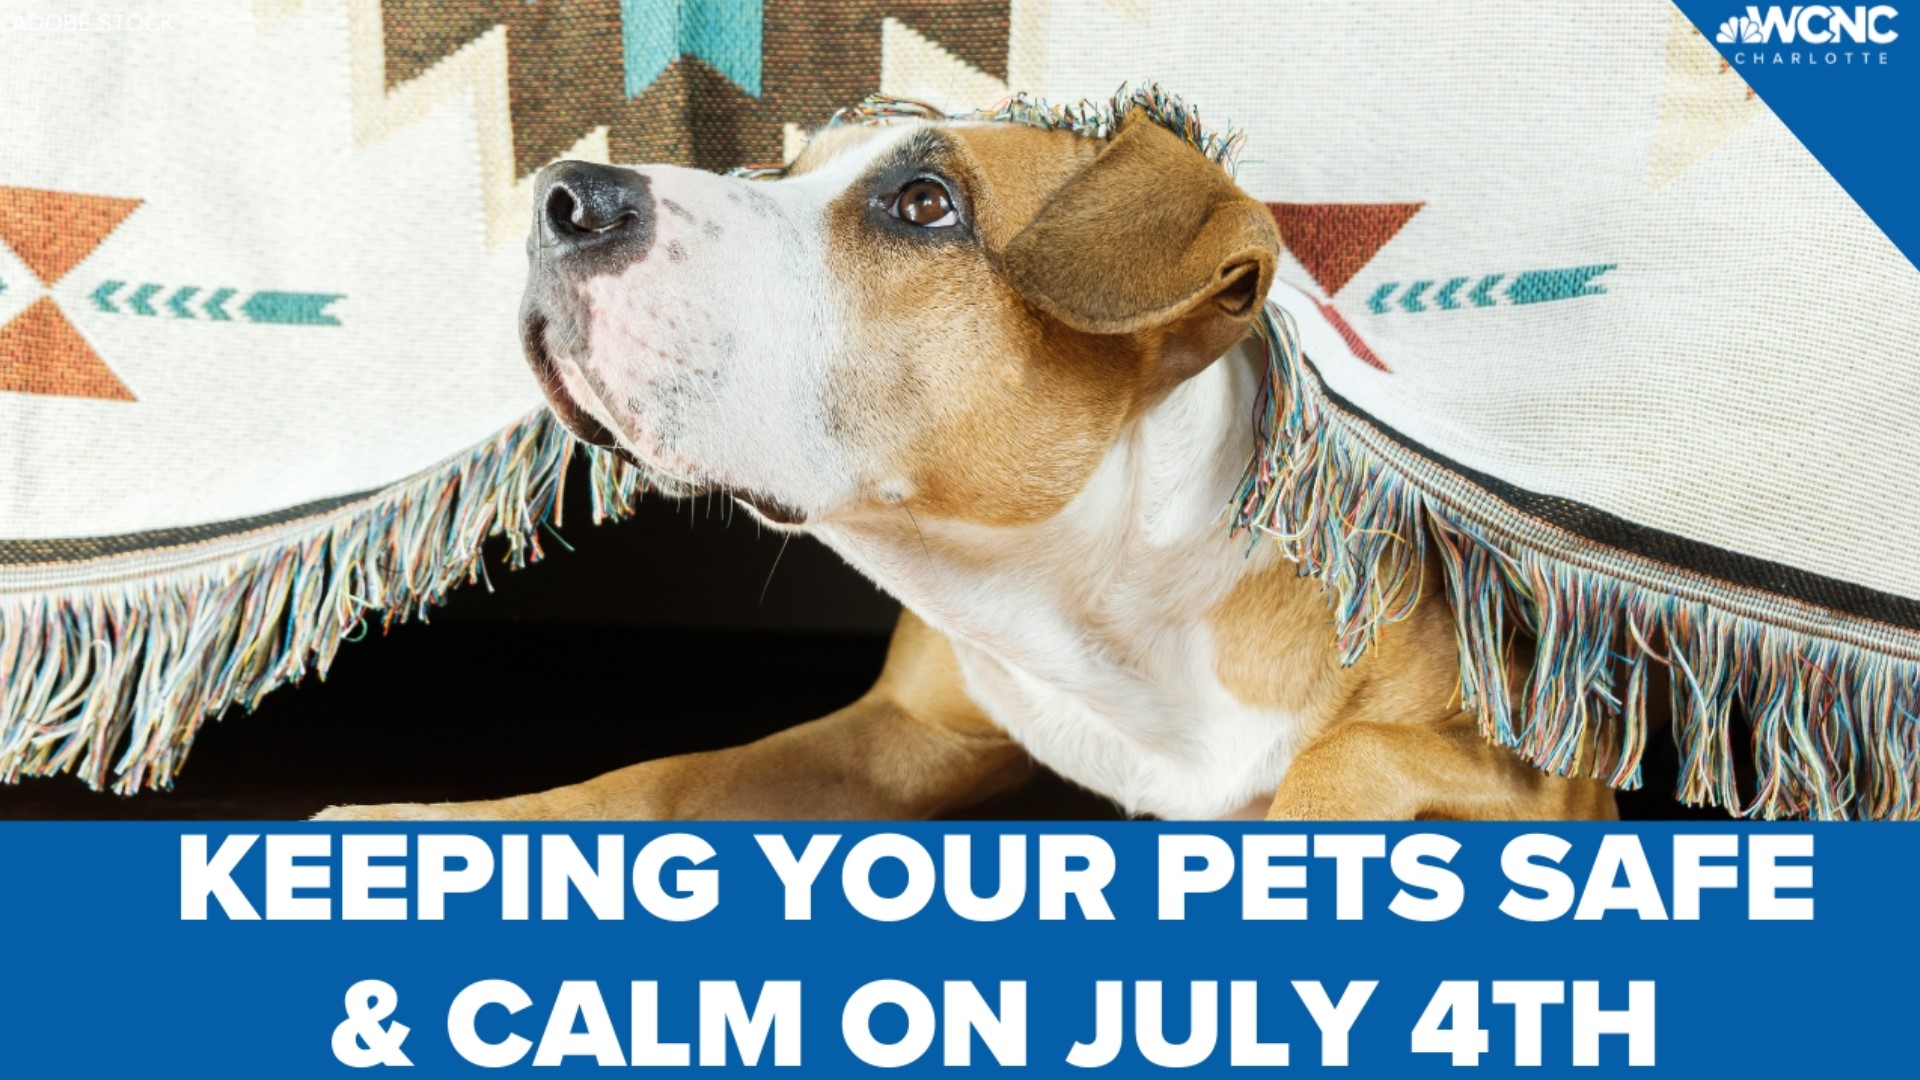 Pets can get anxious from the loud fireworks. Here's what you can do to help.